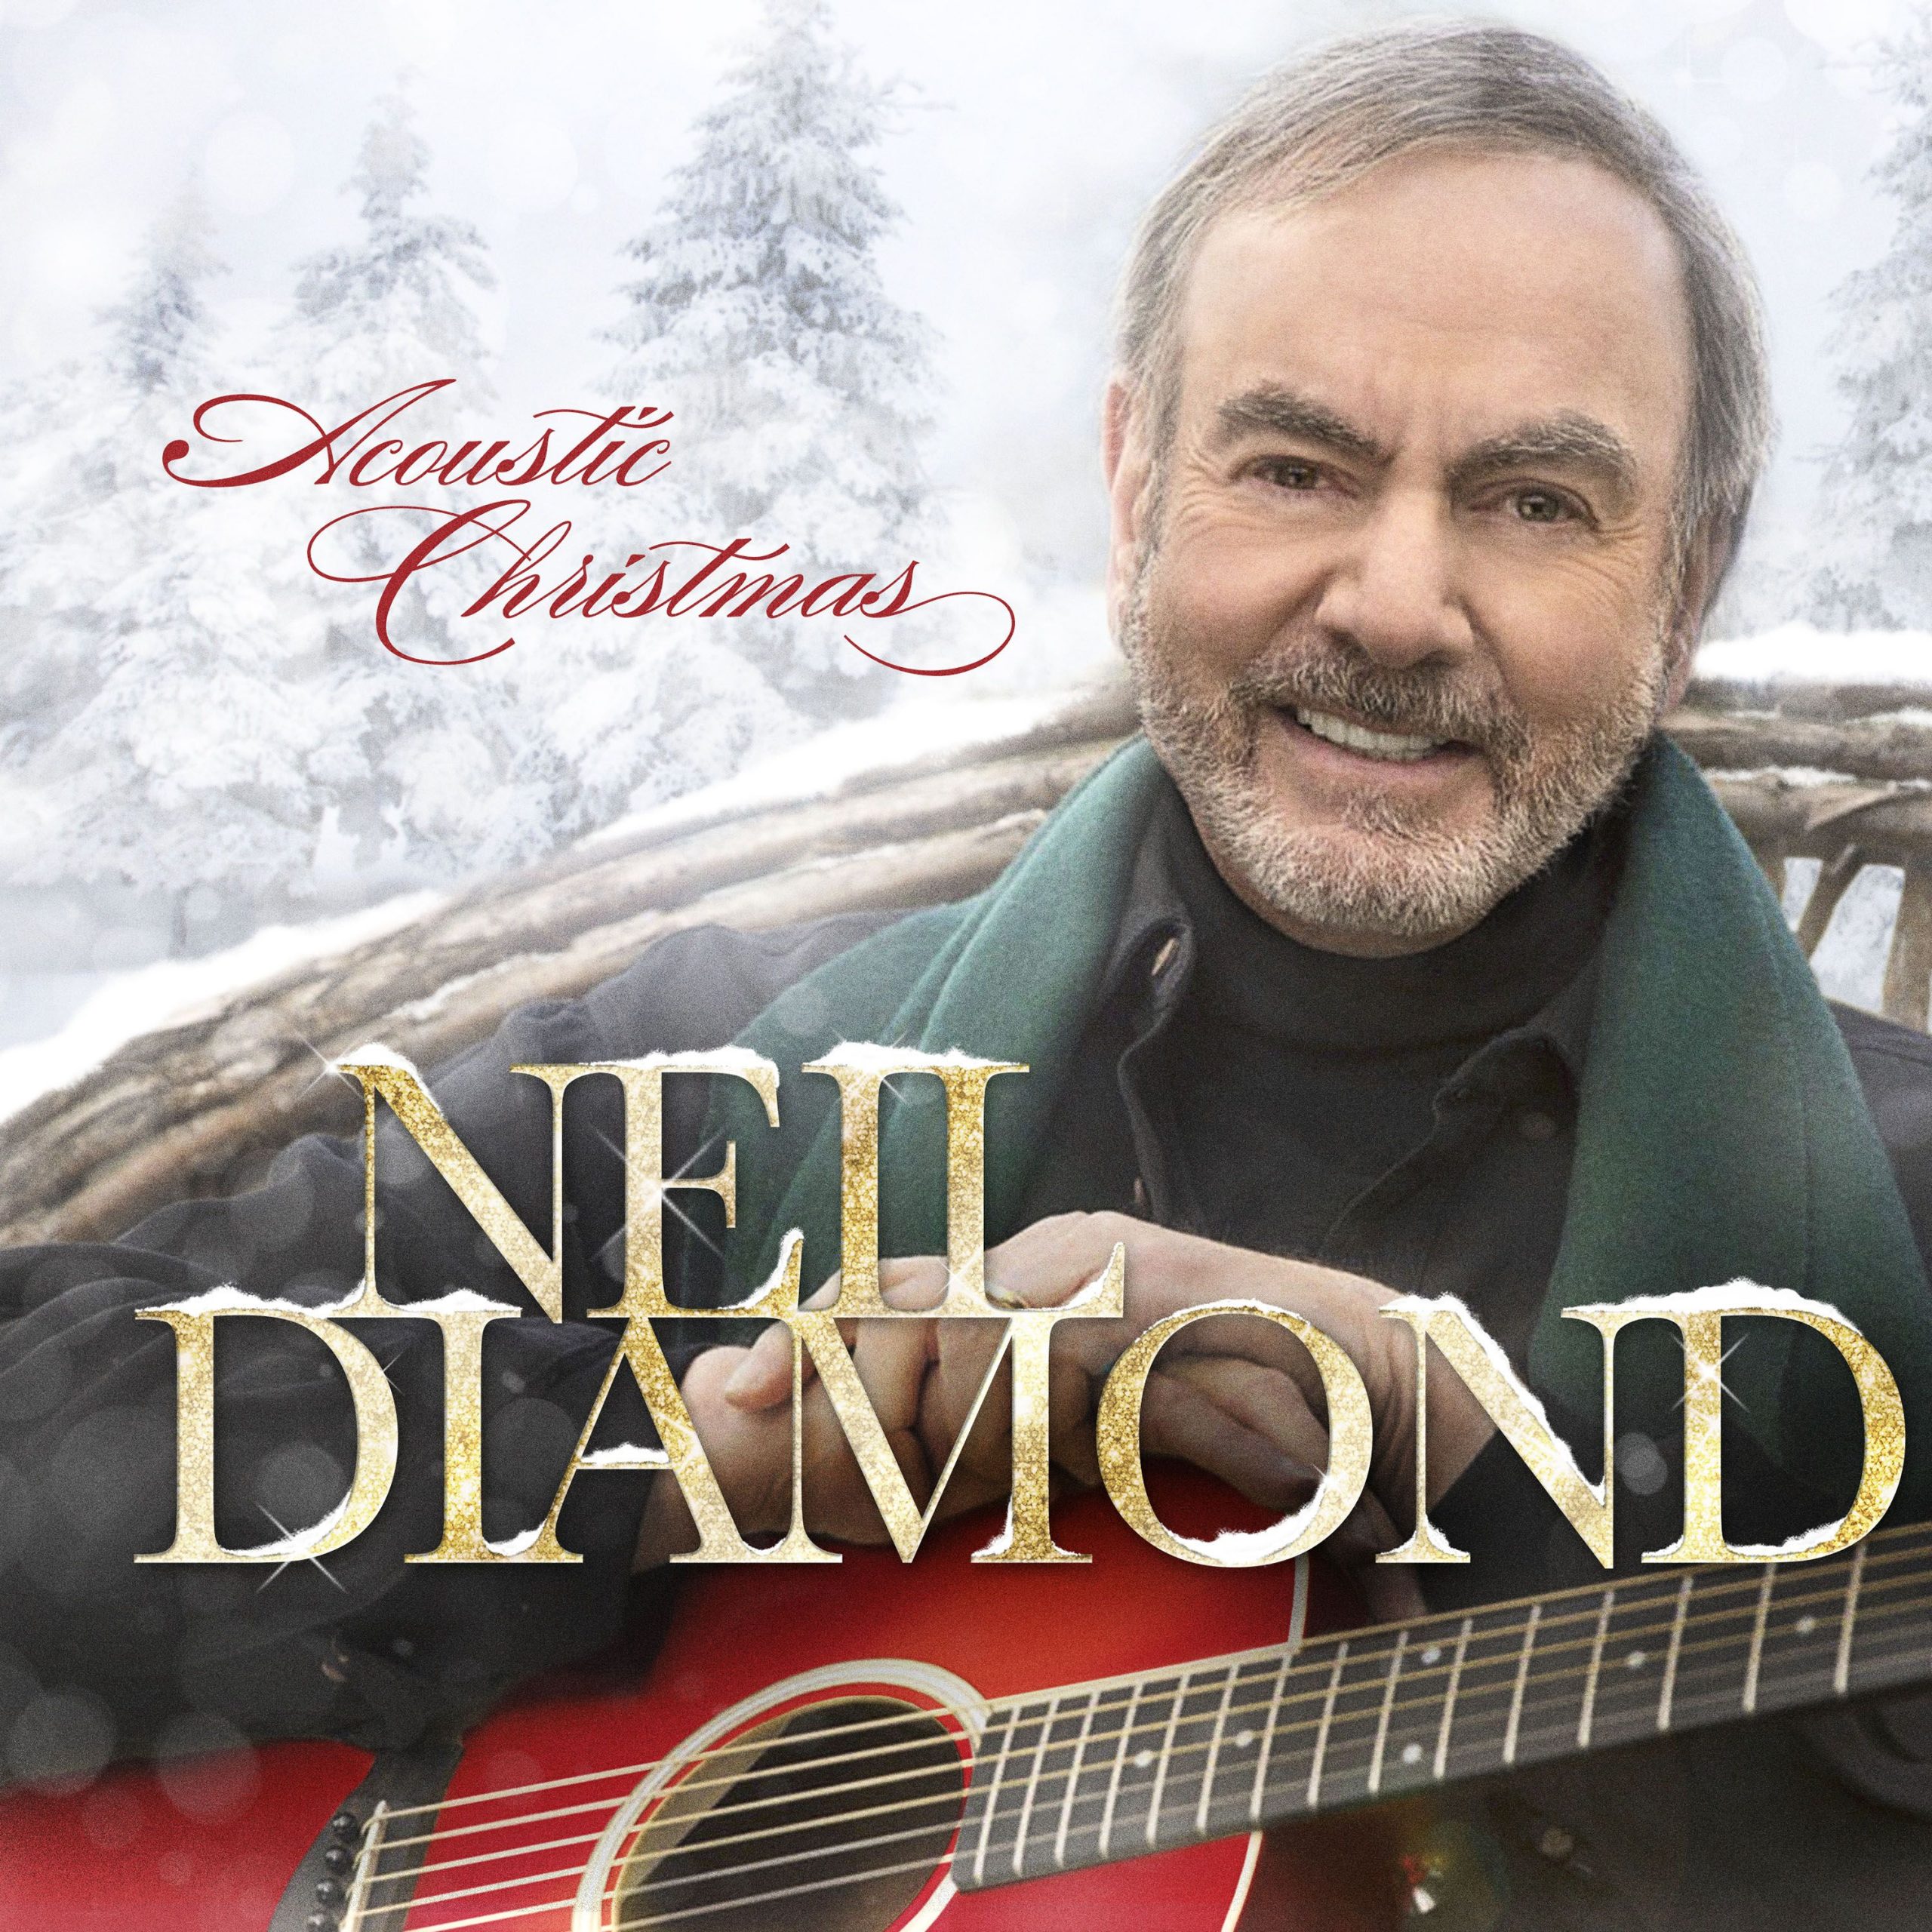 ‘Acoustic Christmas’ Gets a Hollywood Institution Thumbs-Up